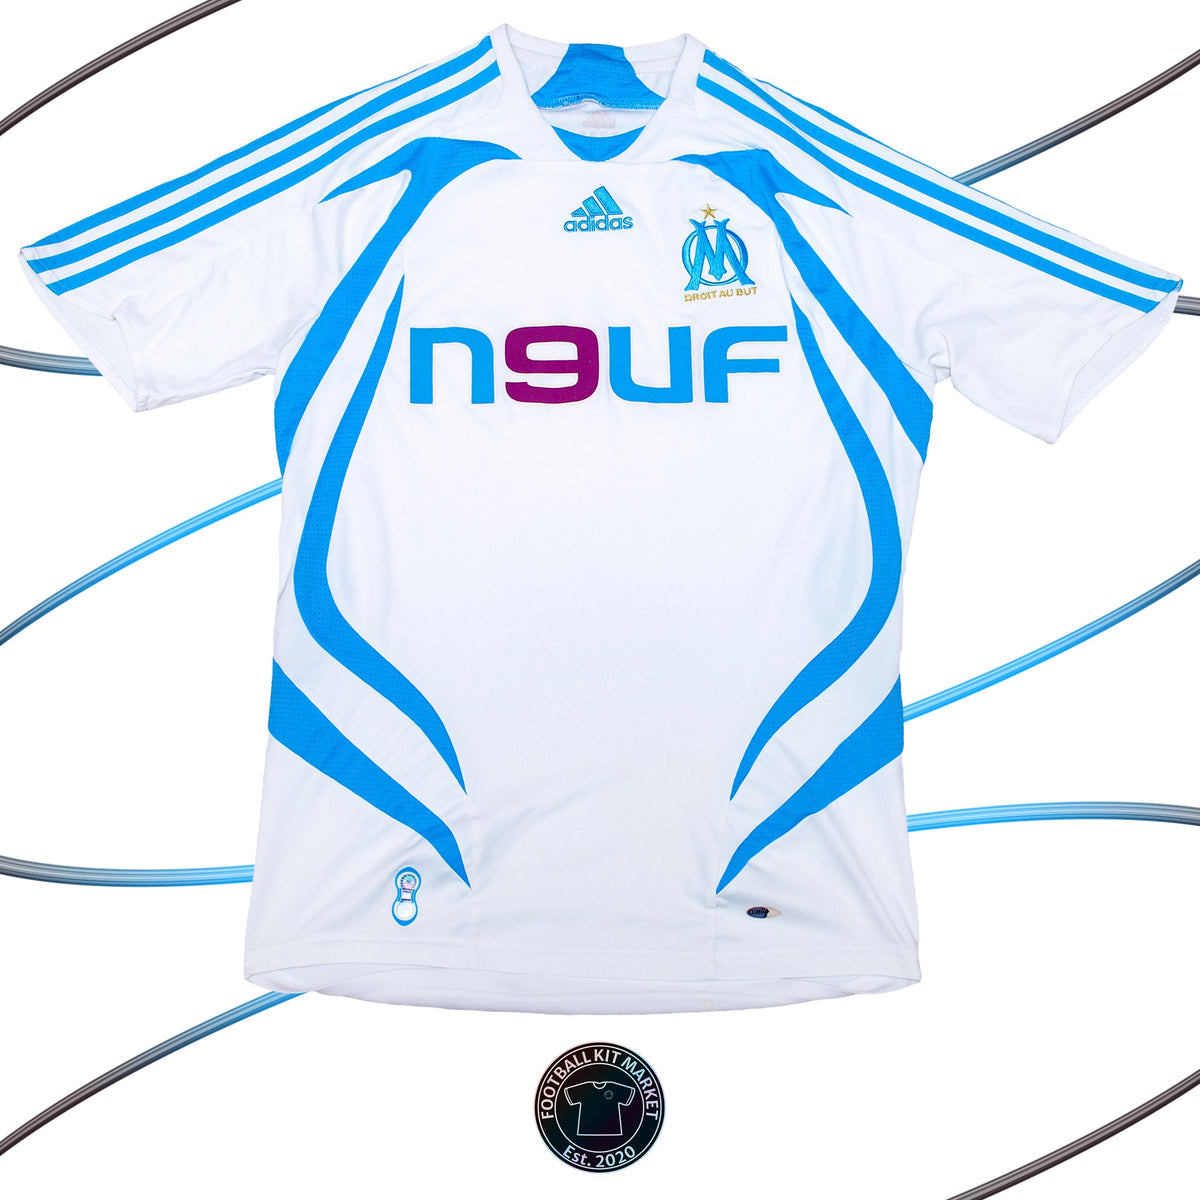 Genuine MARSEILLE Home Shirt (2007-2008) - ADIDAS (S) - Product Image from Football Kit Market